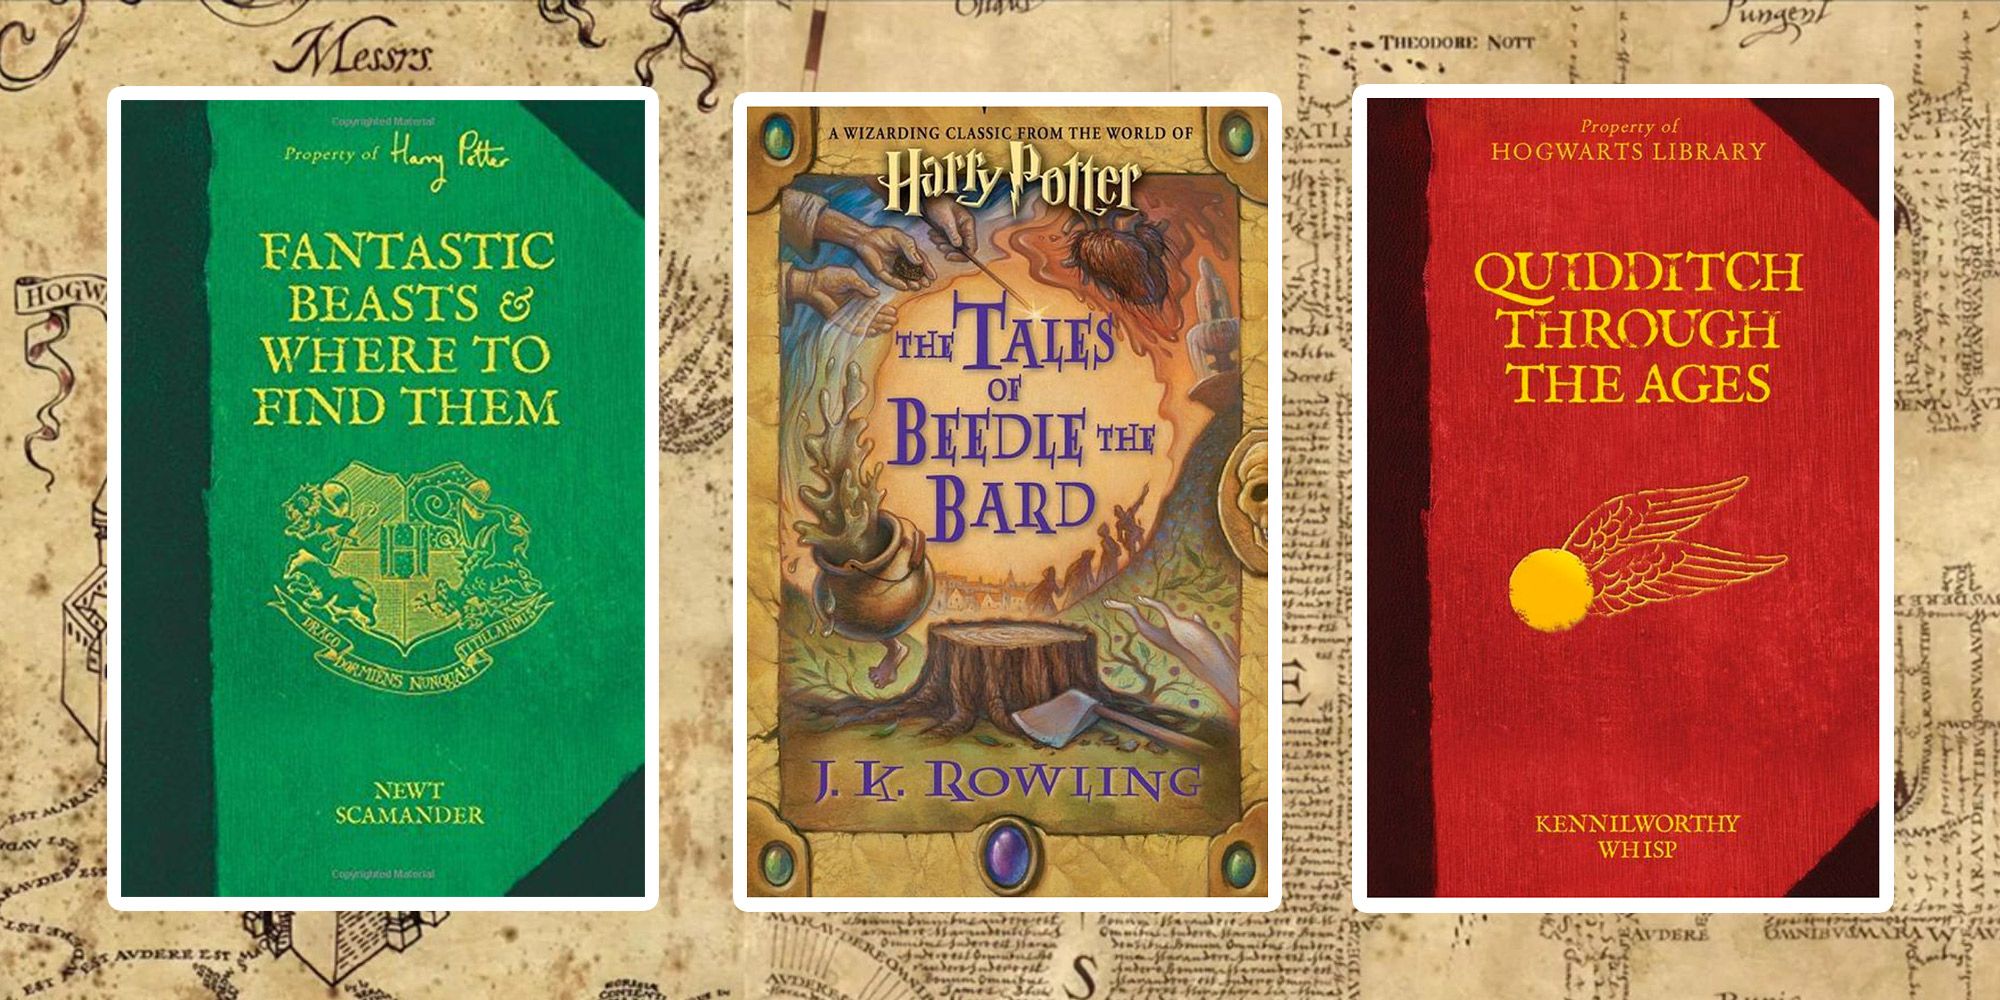 Are there any spin-off books related to Harry Potter?